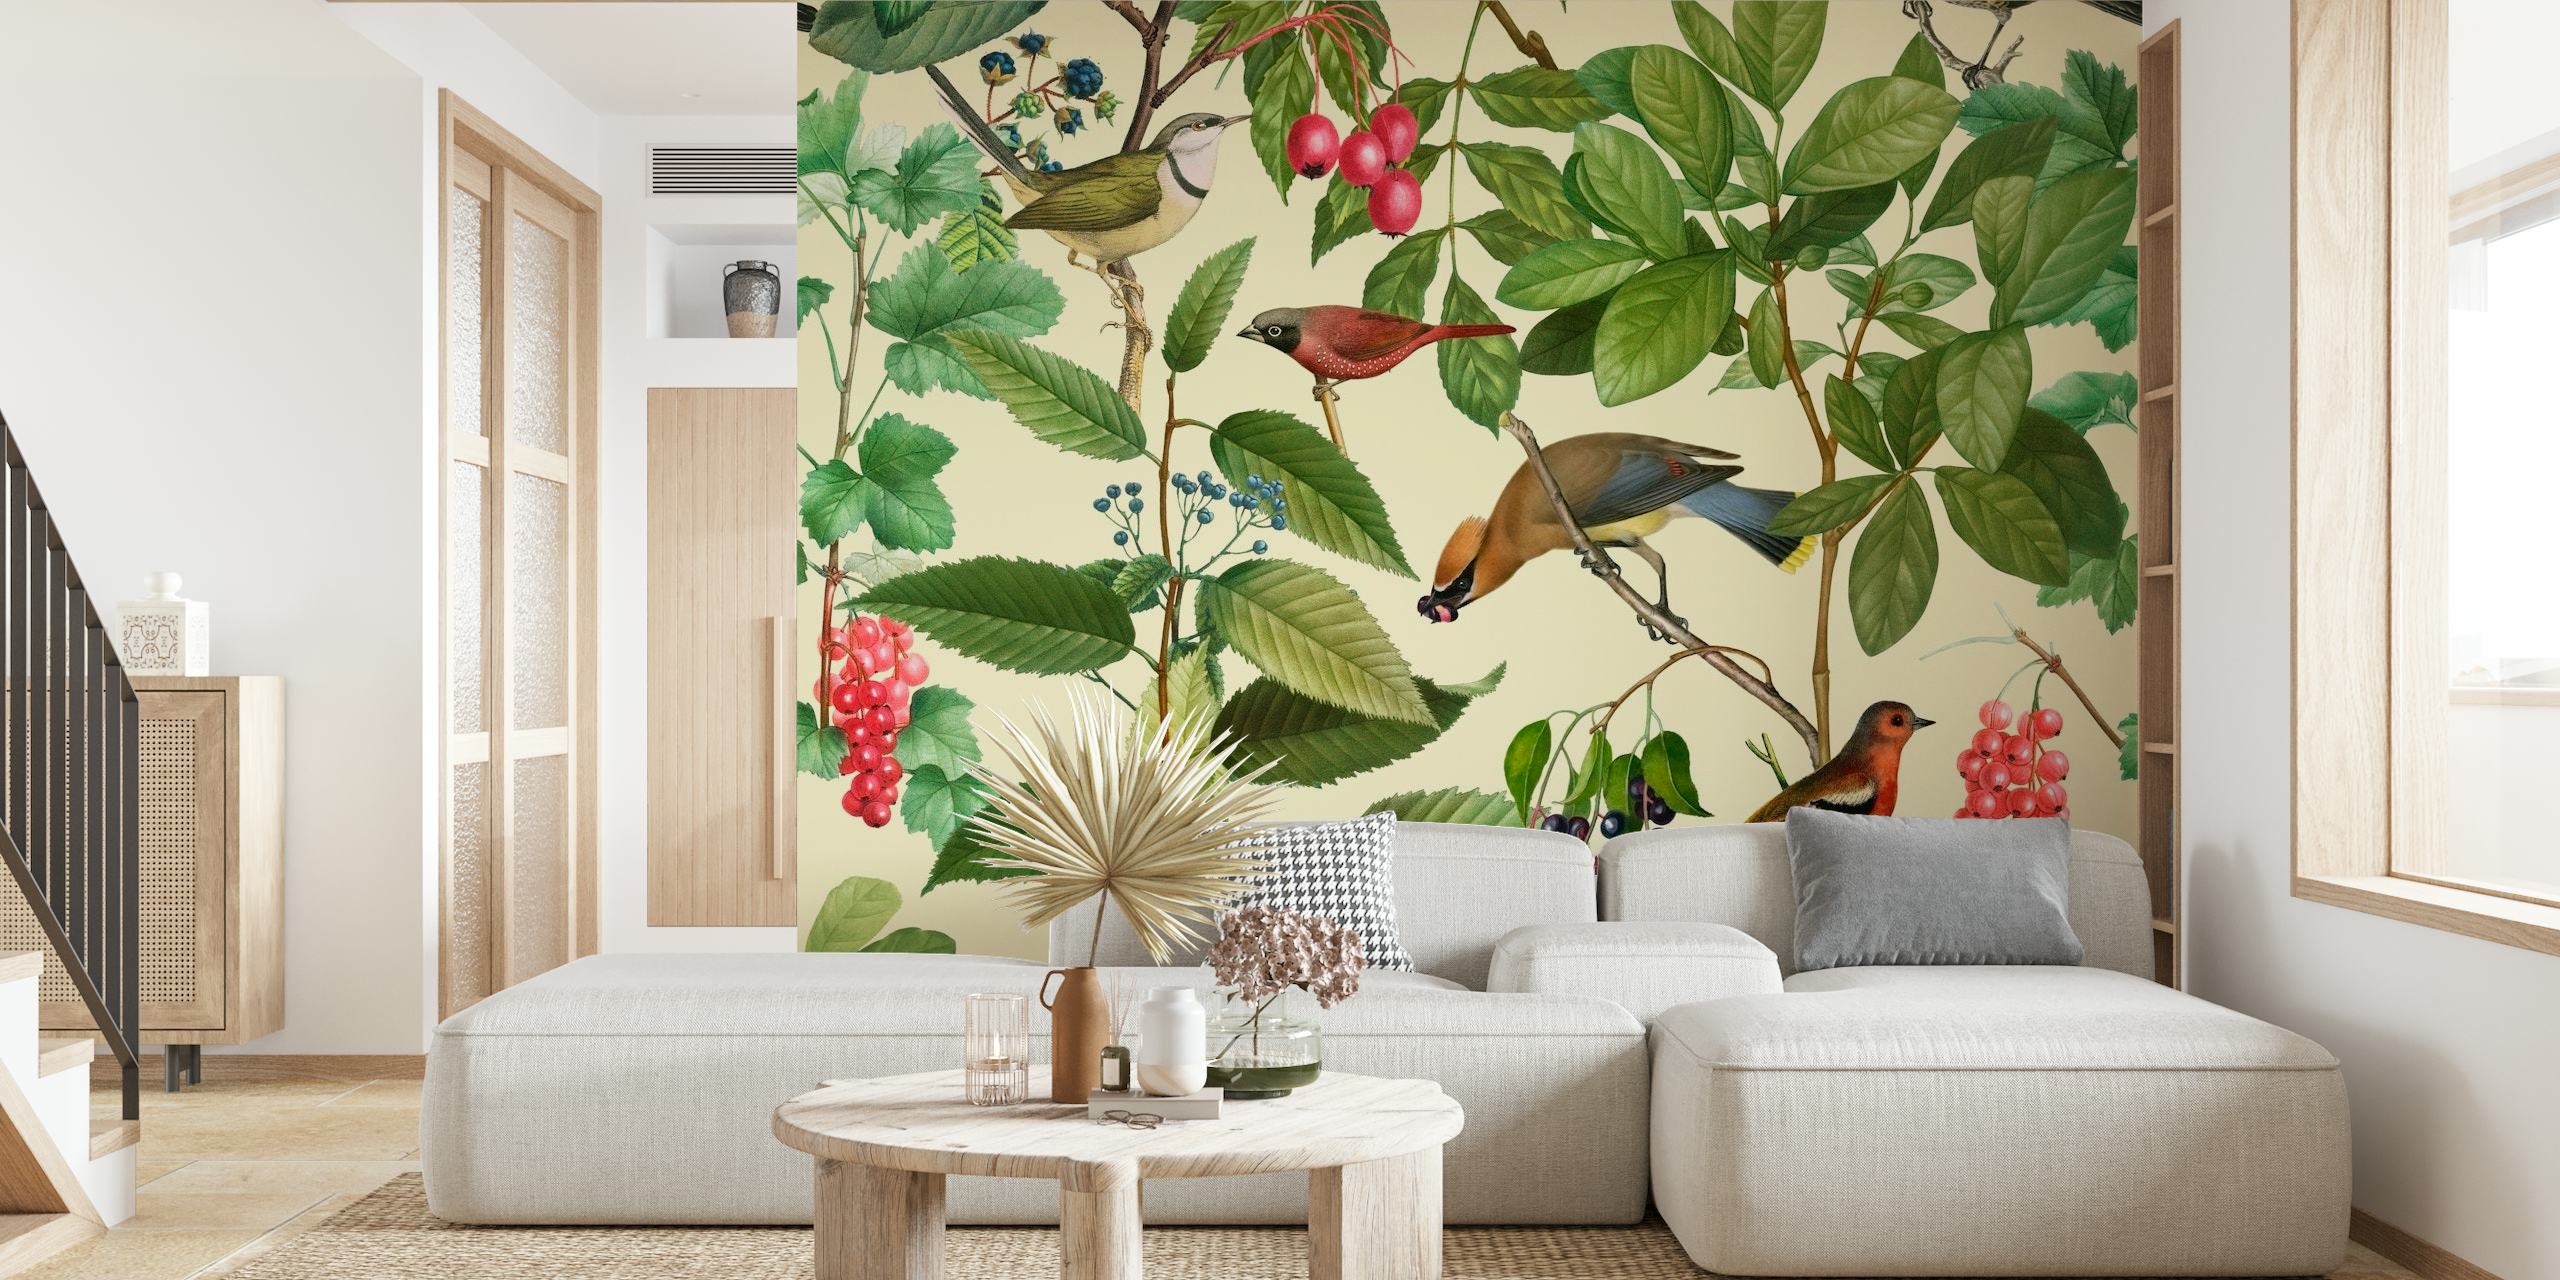 Illustrative wall mural of birds perched on branches with berries and green leaves on a soft background.